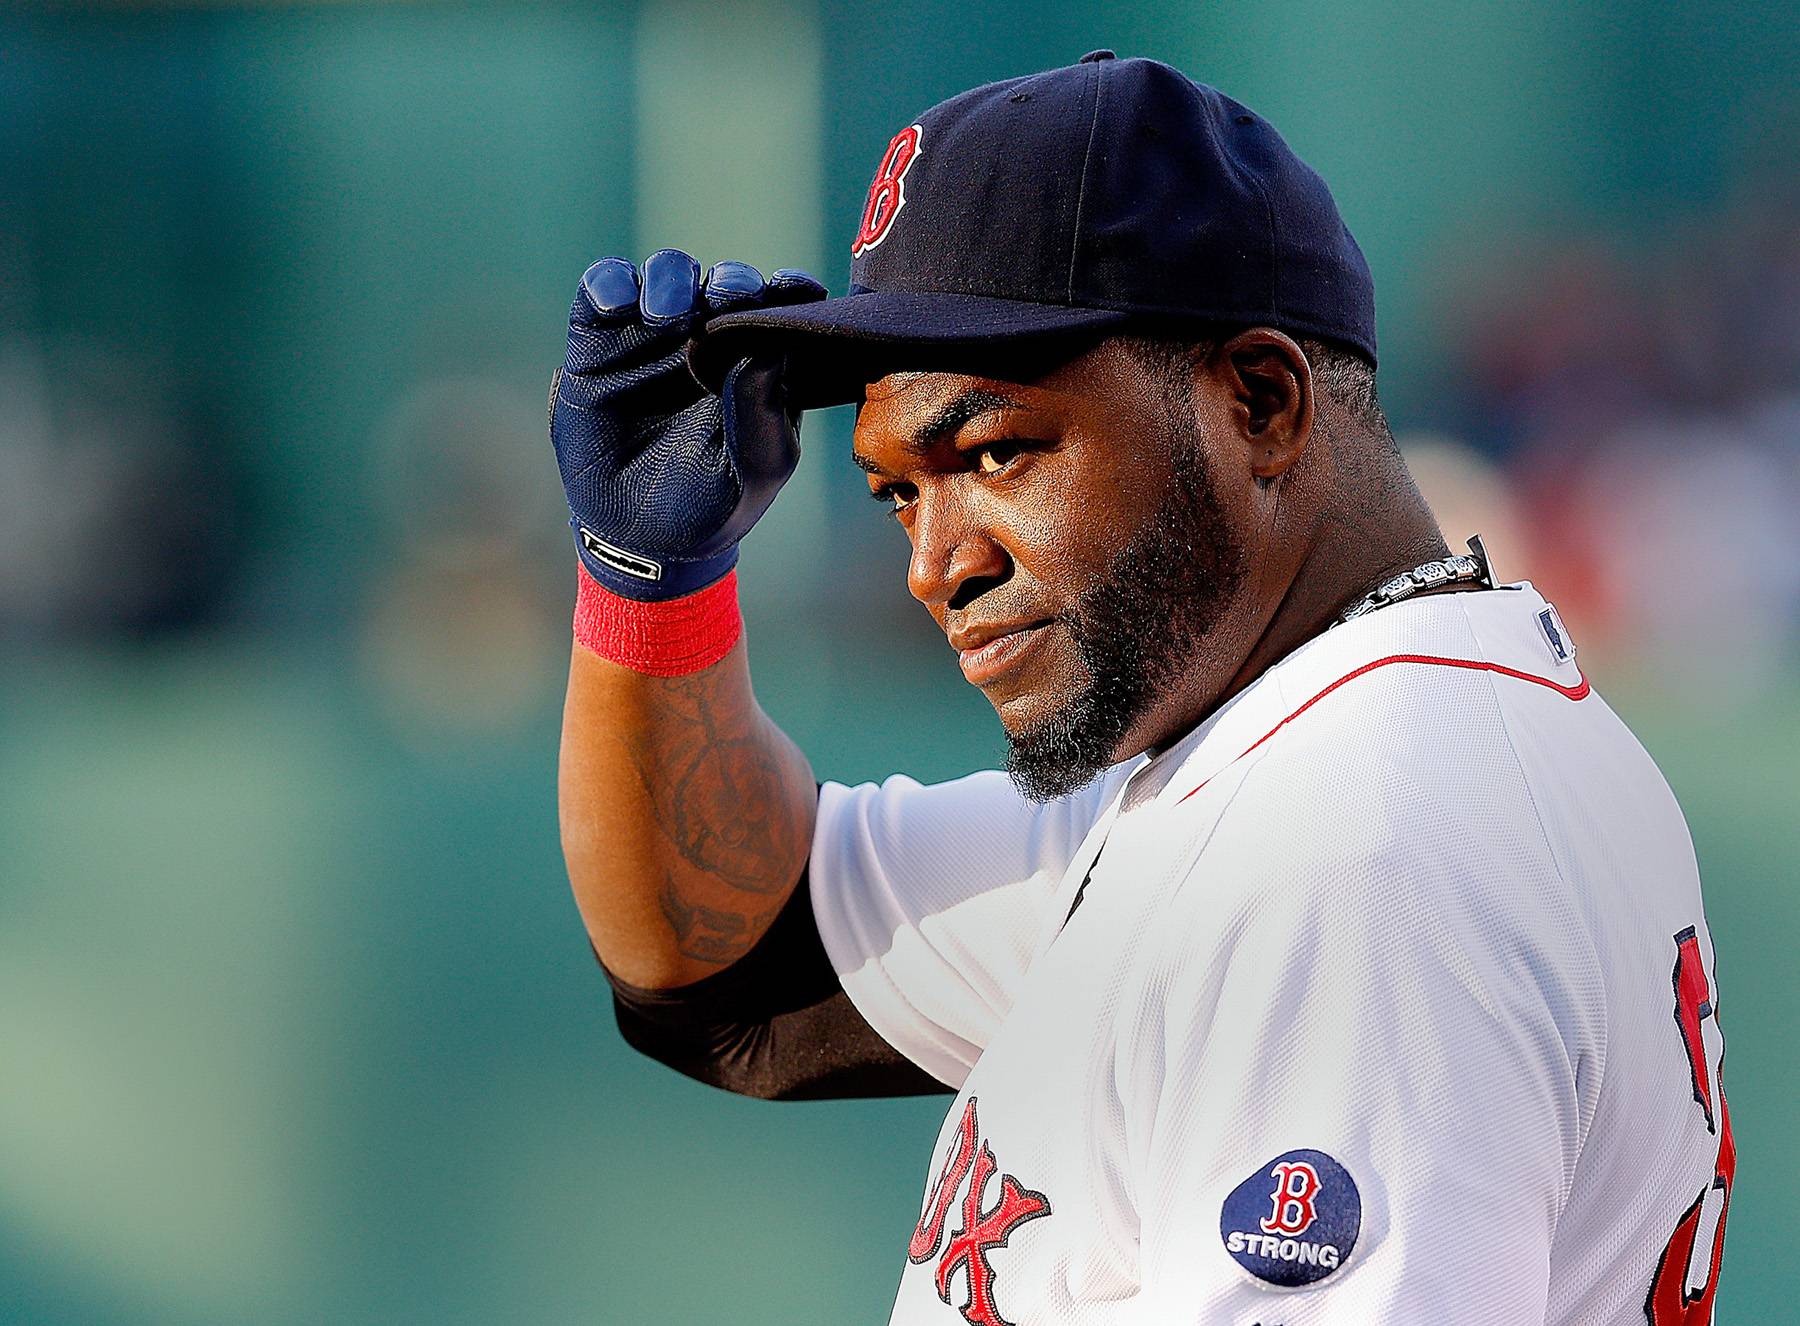 David Ortiz Wants a Standing Ovation from Yankees Fans